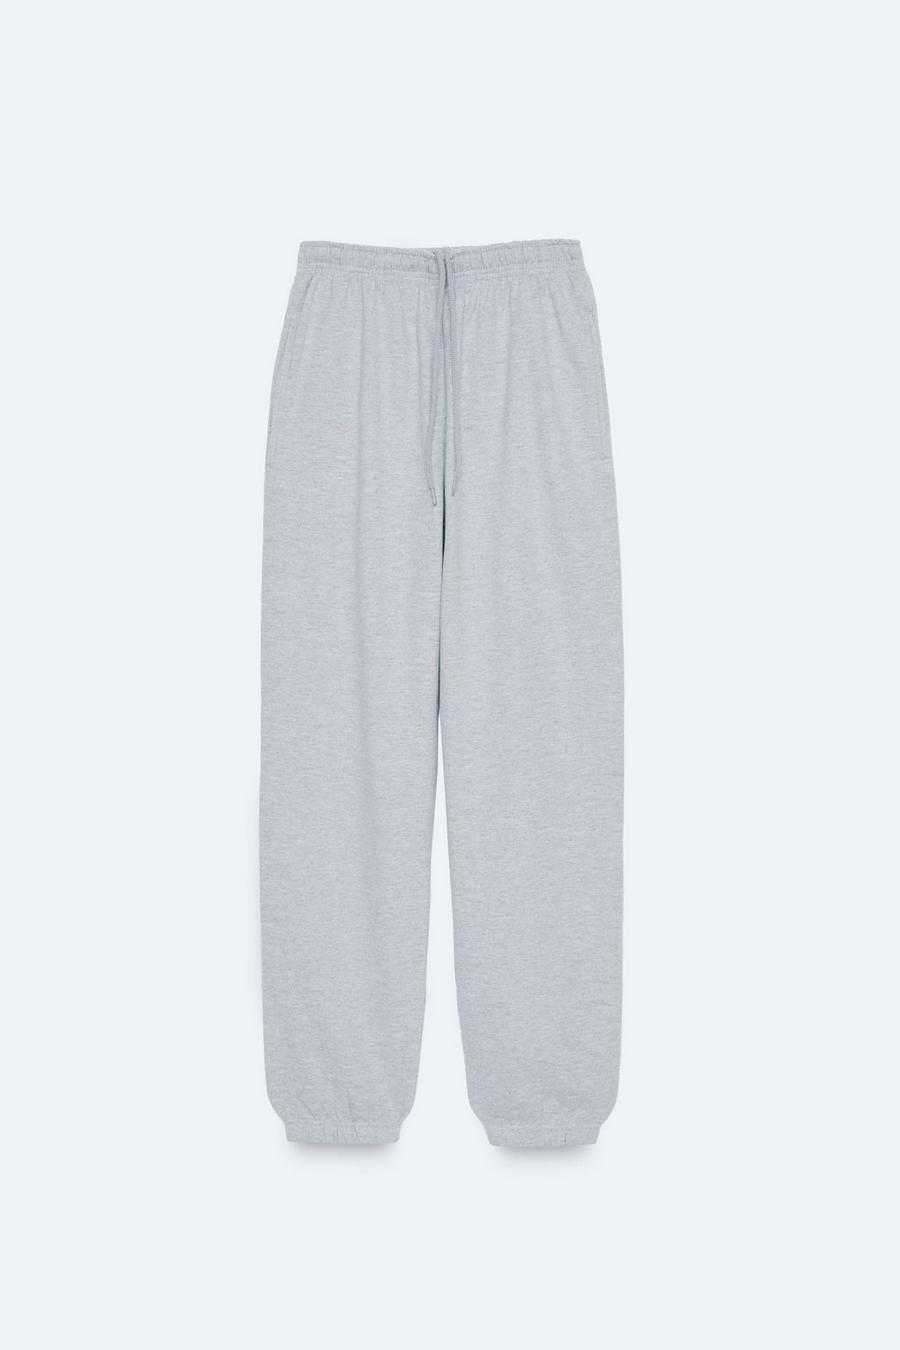 High Waisted Loose Fit Cuffed Sweatpants